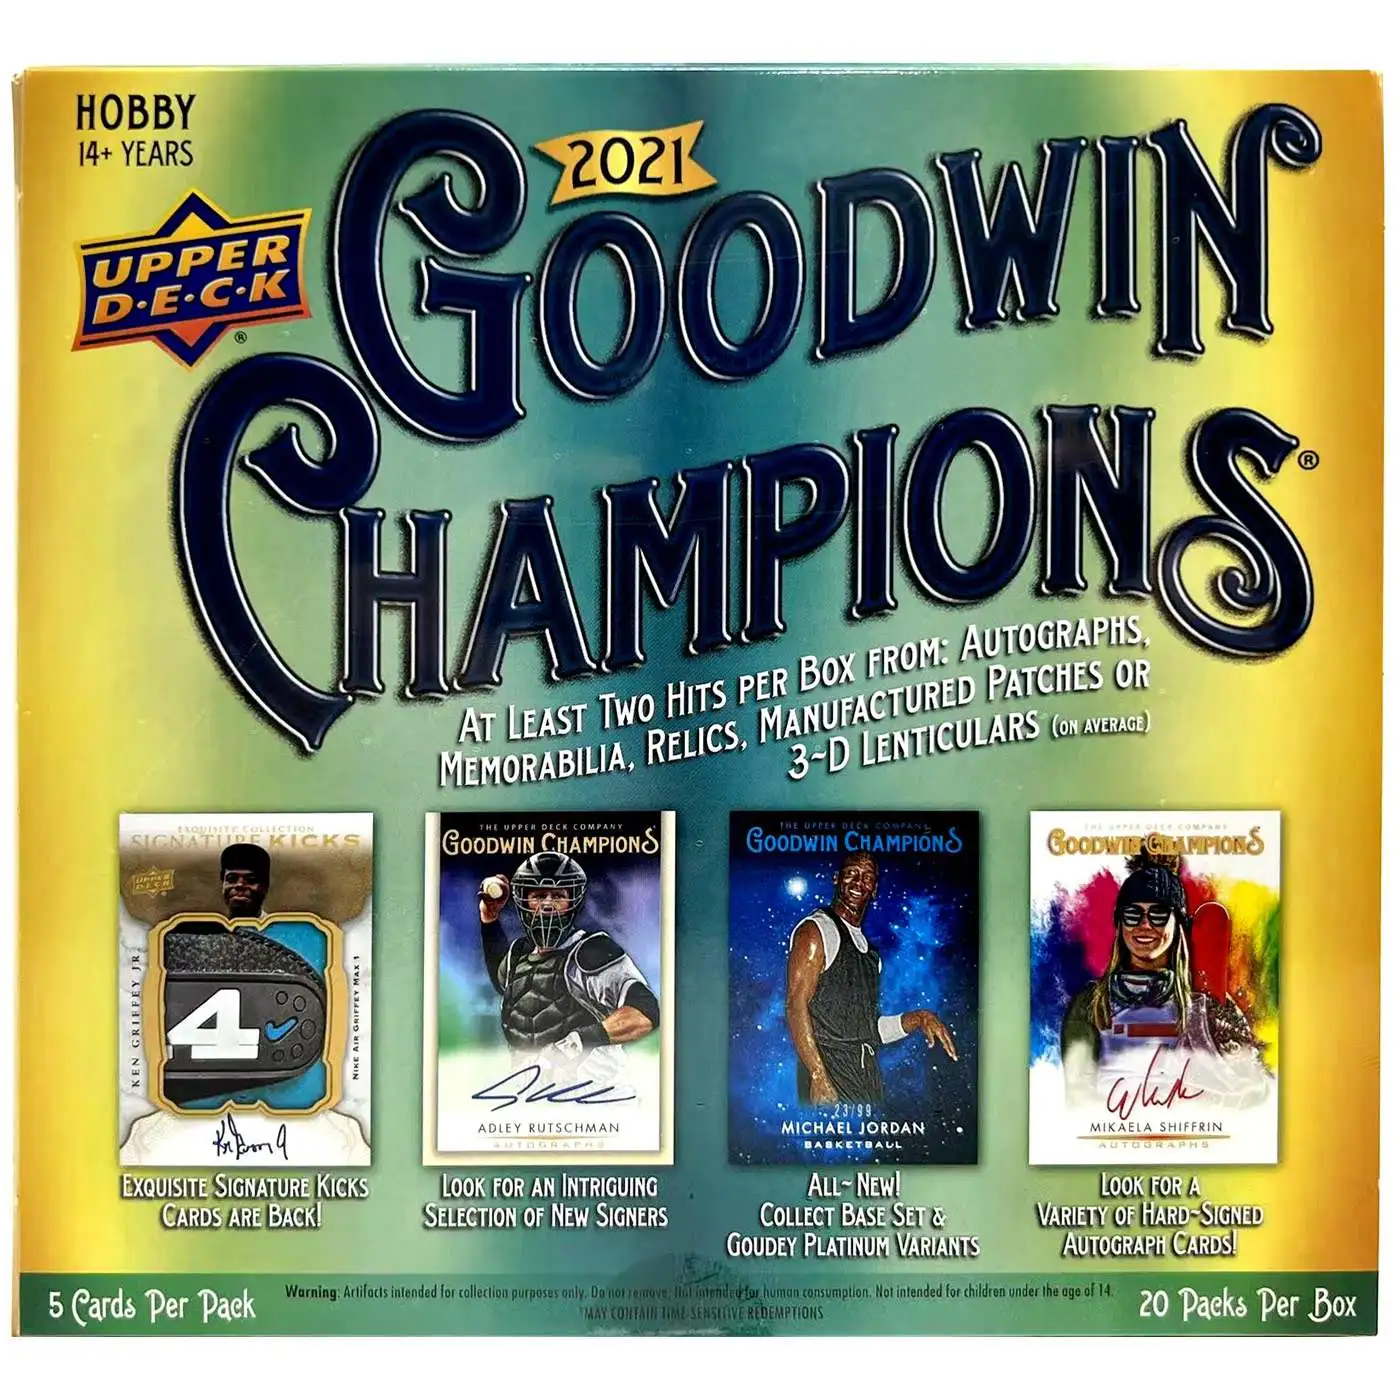 Topps Disney Collect Toys in Sports Spectrum/Sporty Slogans & Character Card Set 